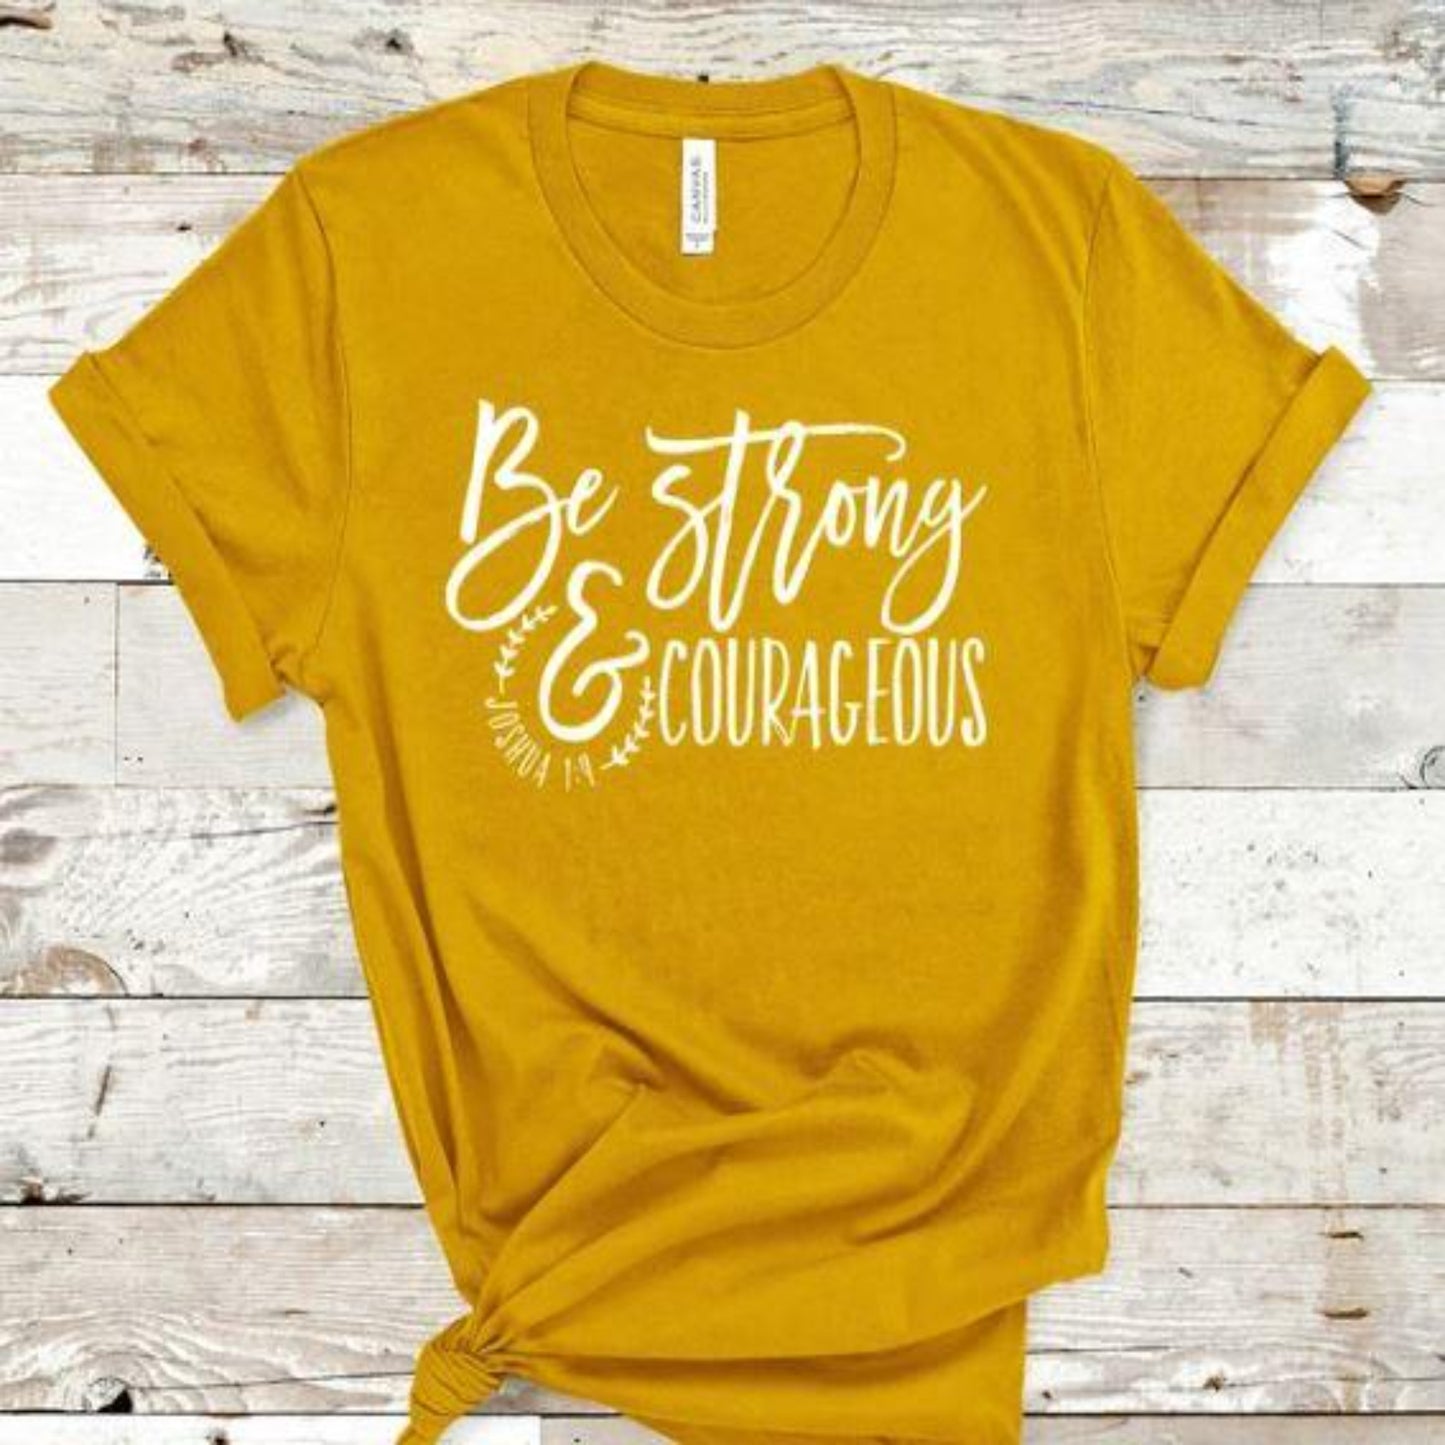 be_strong_and_courageous specialty tee casual shirt motivational tshirt